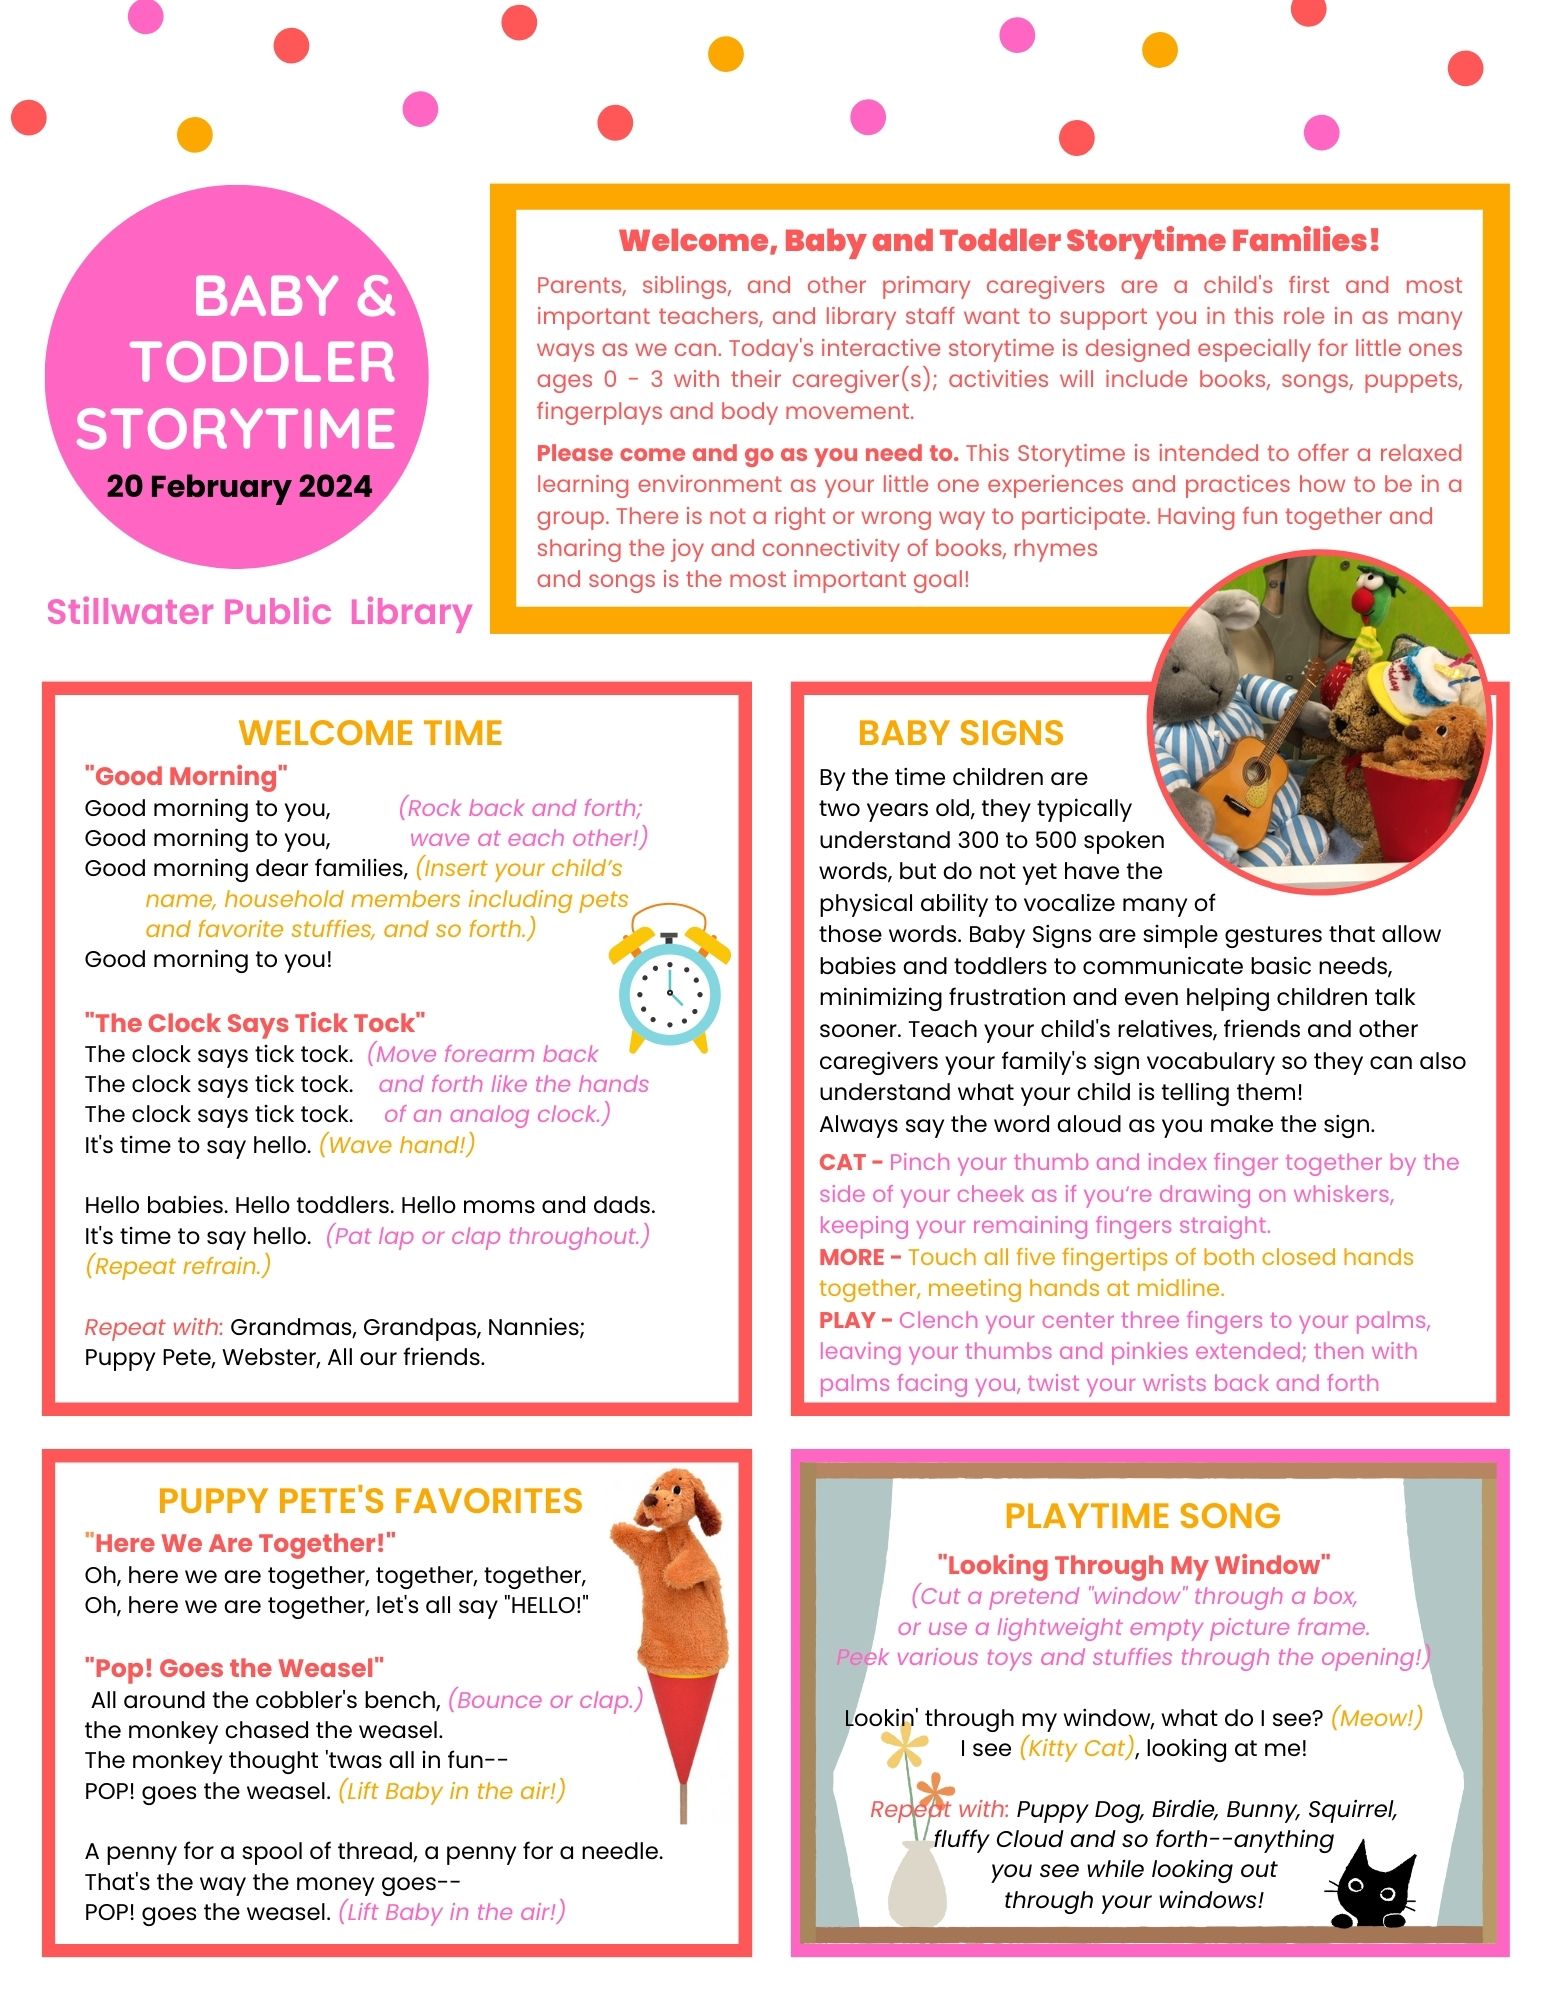 Baby Toddler Storytime Handout Feb 20, 2024